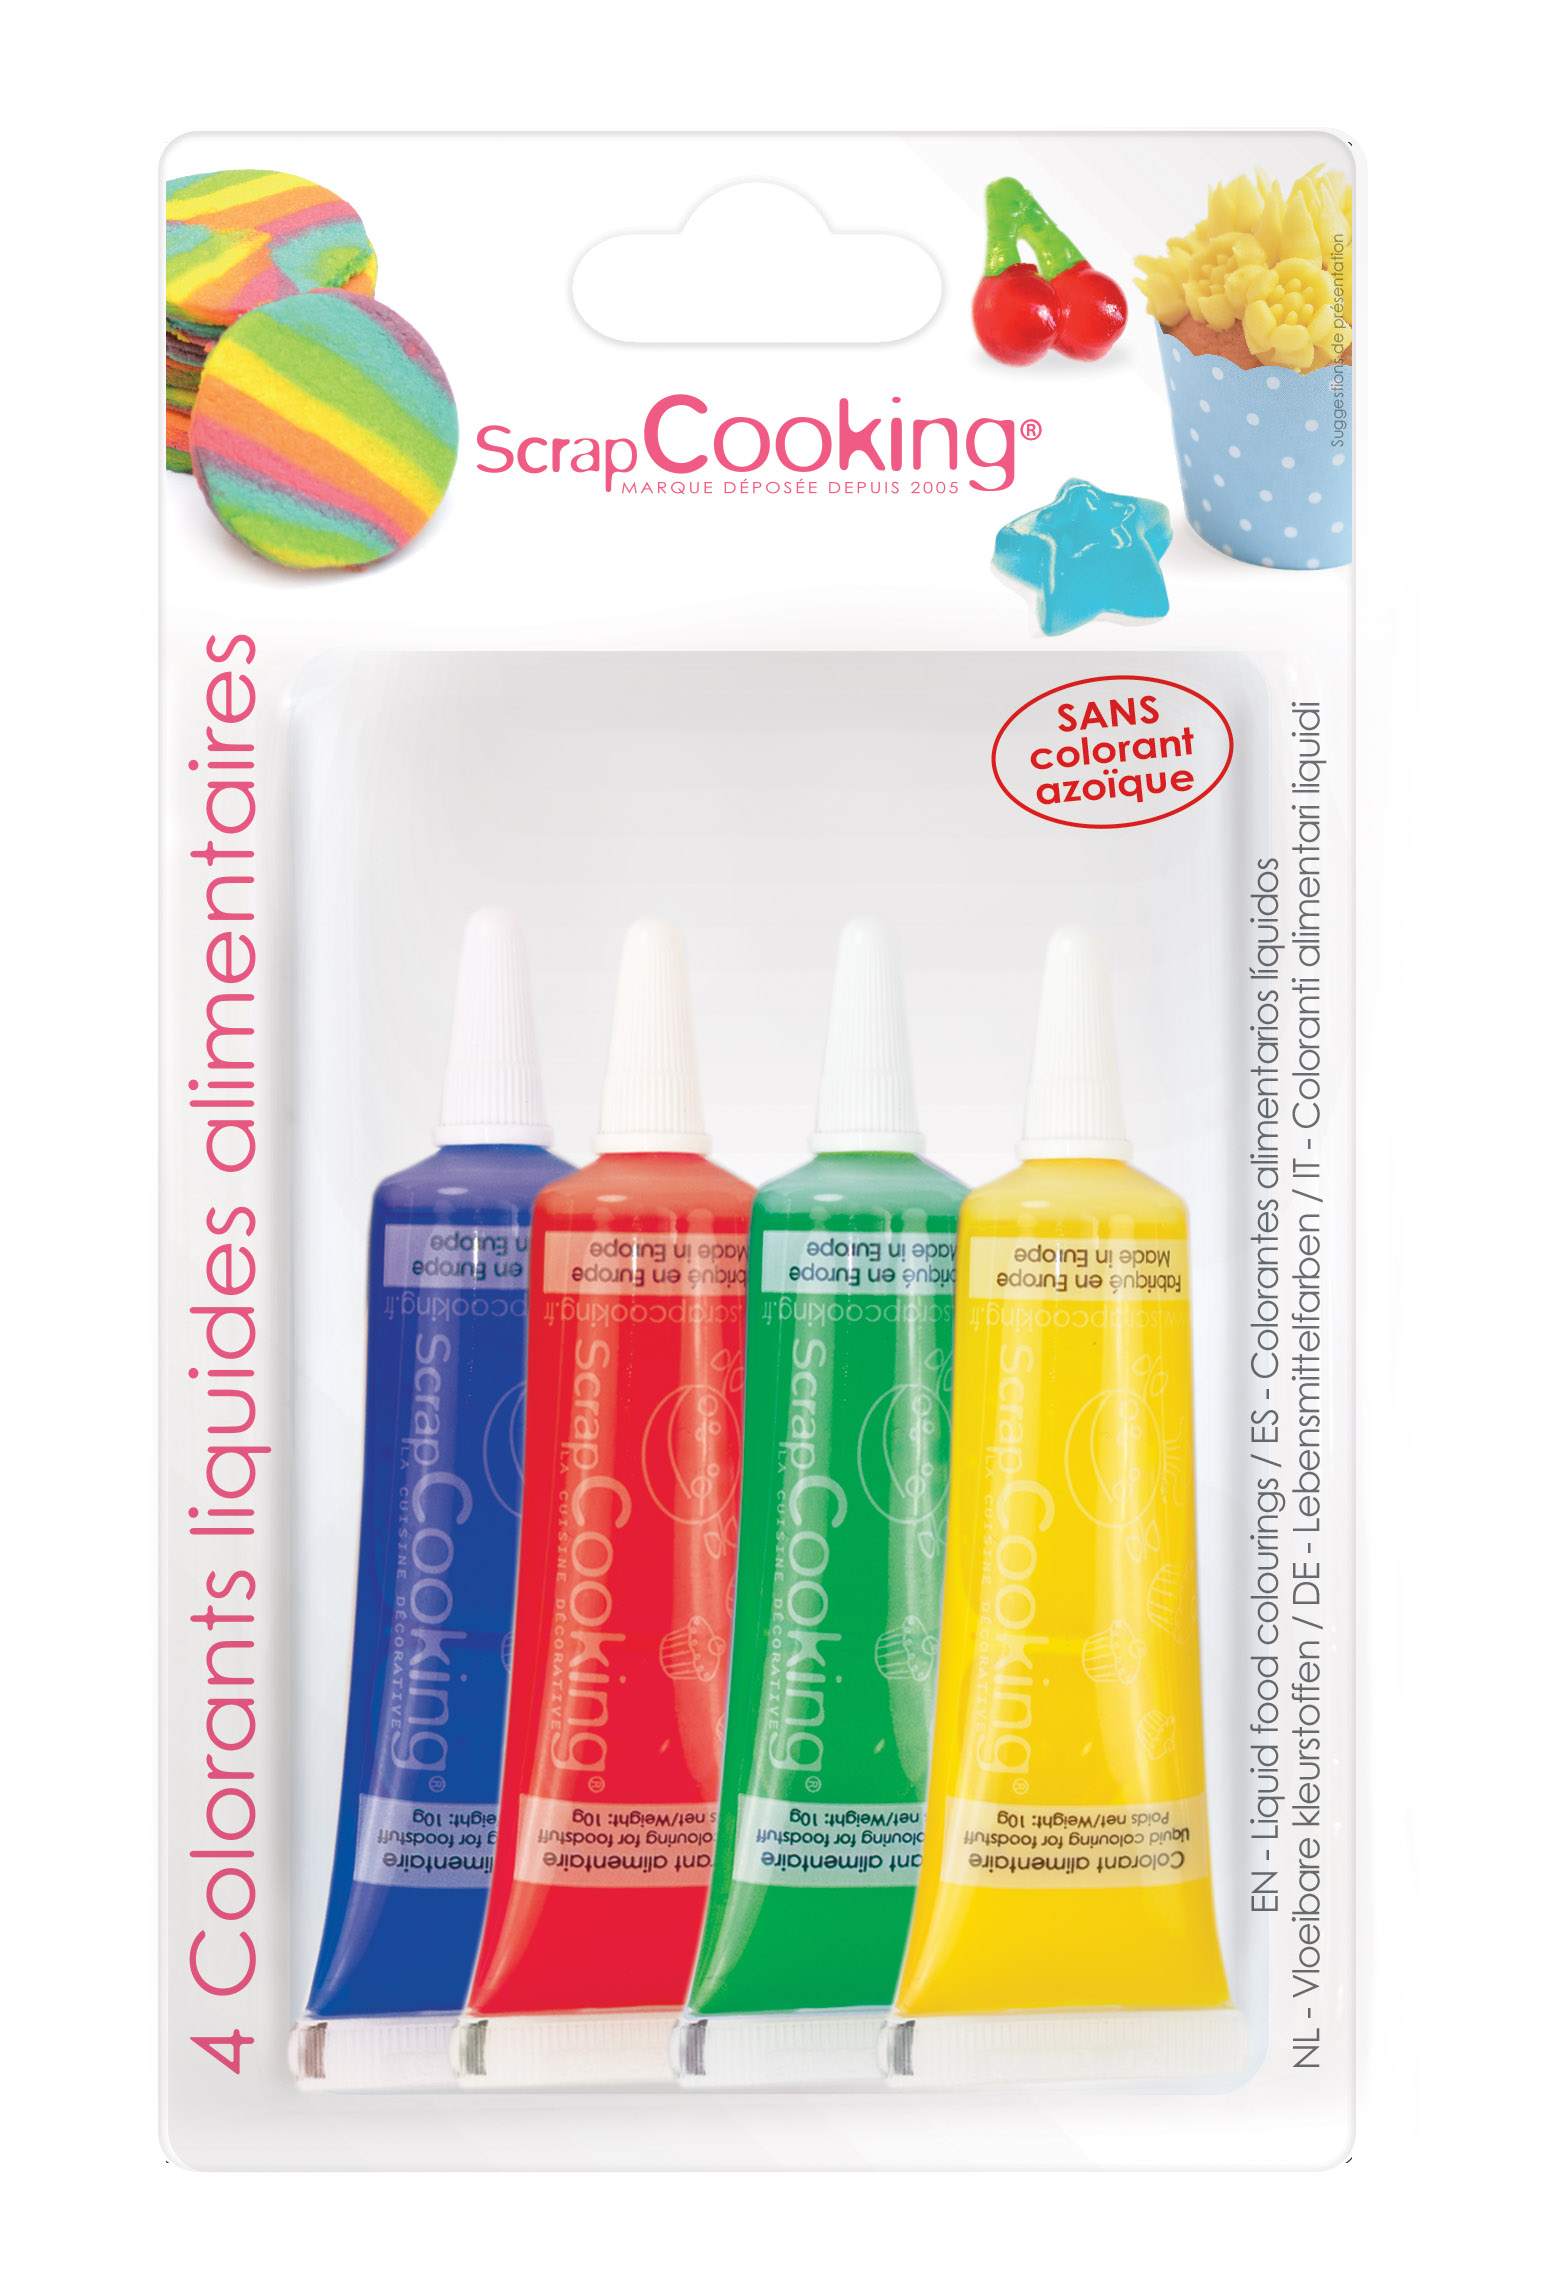 ScrapCooking 4 Food Colouring 40g